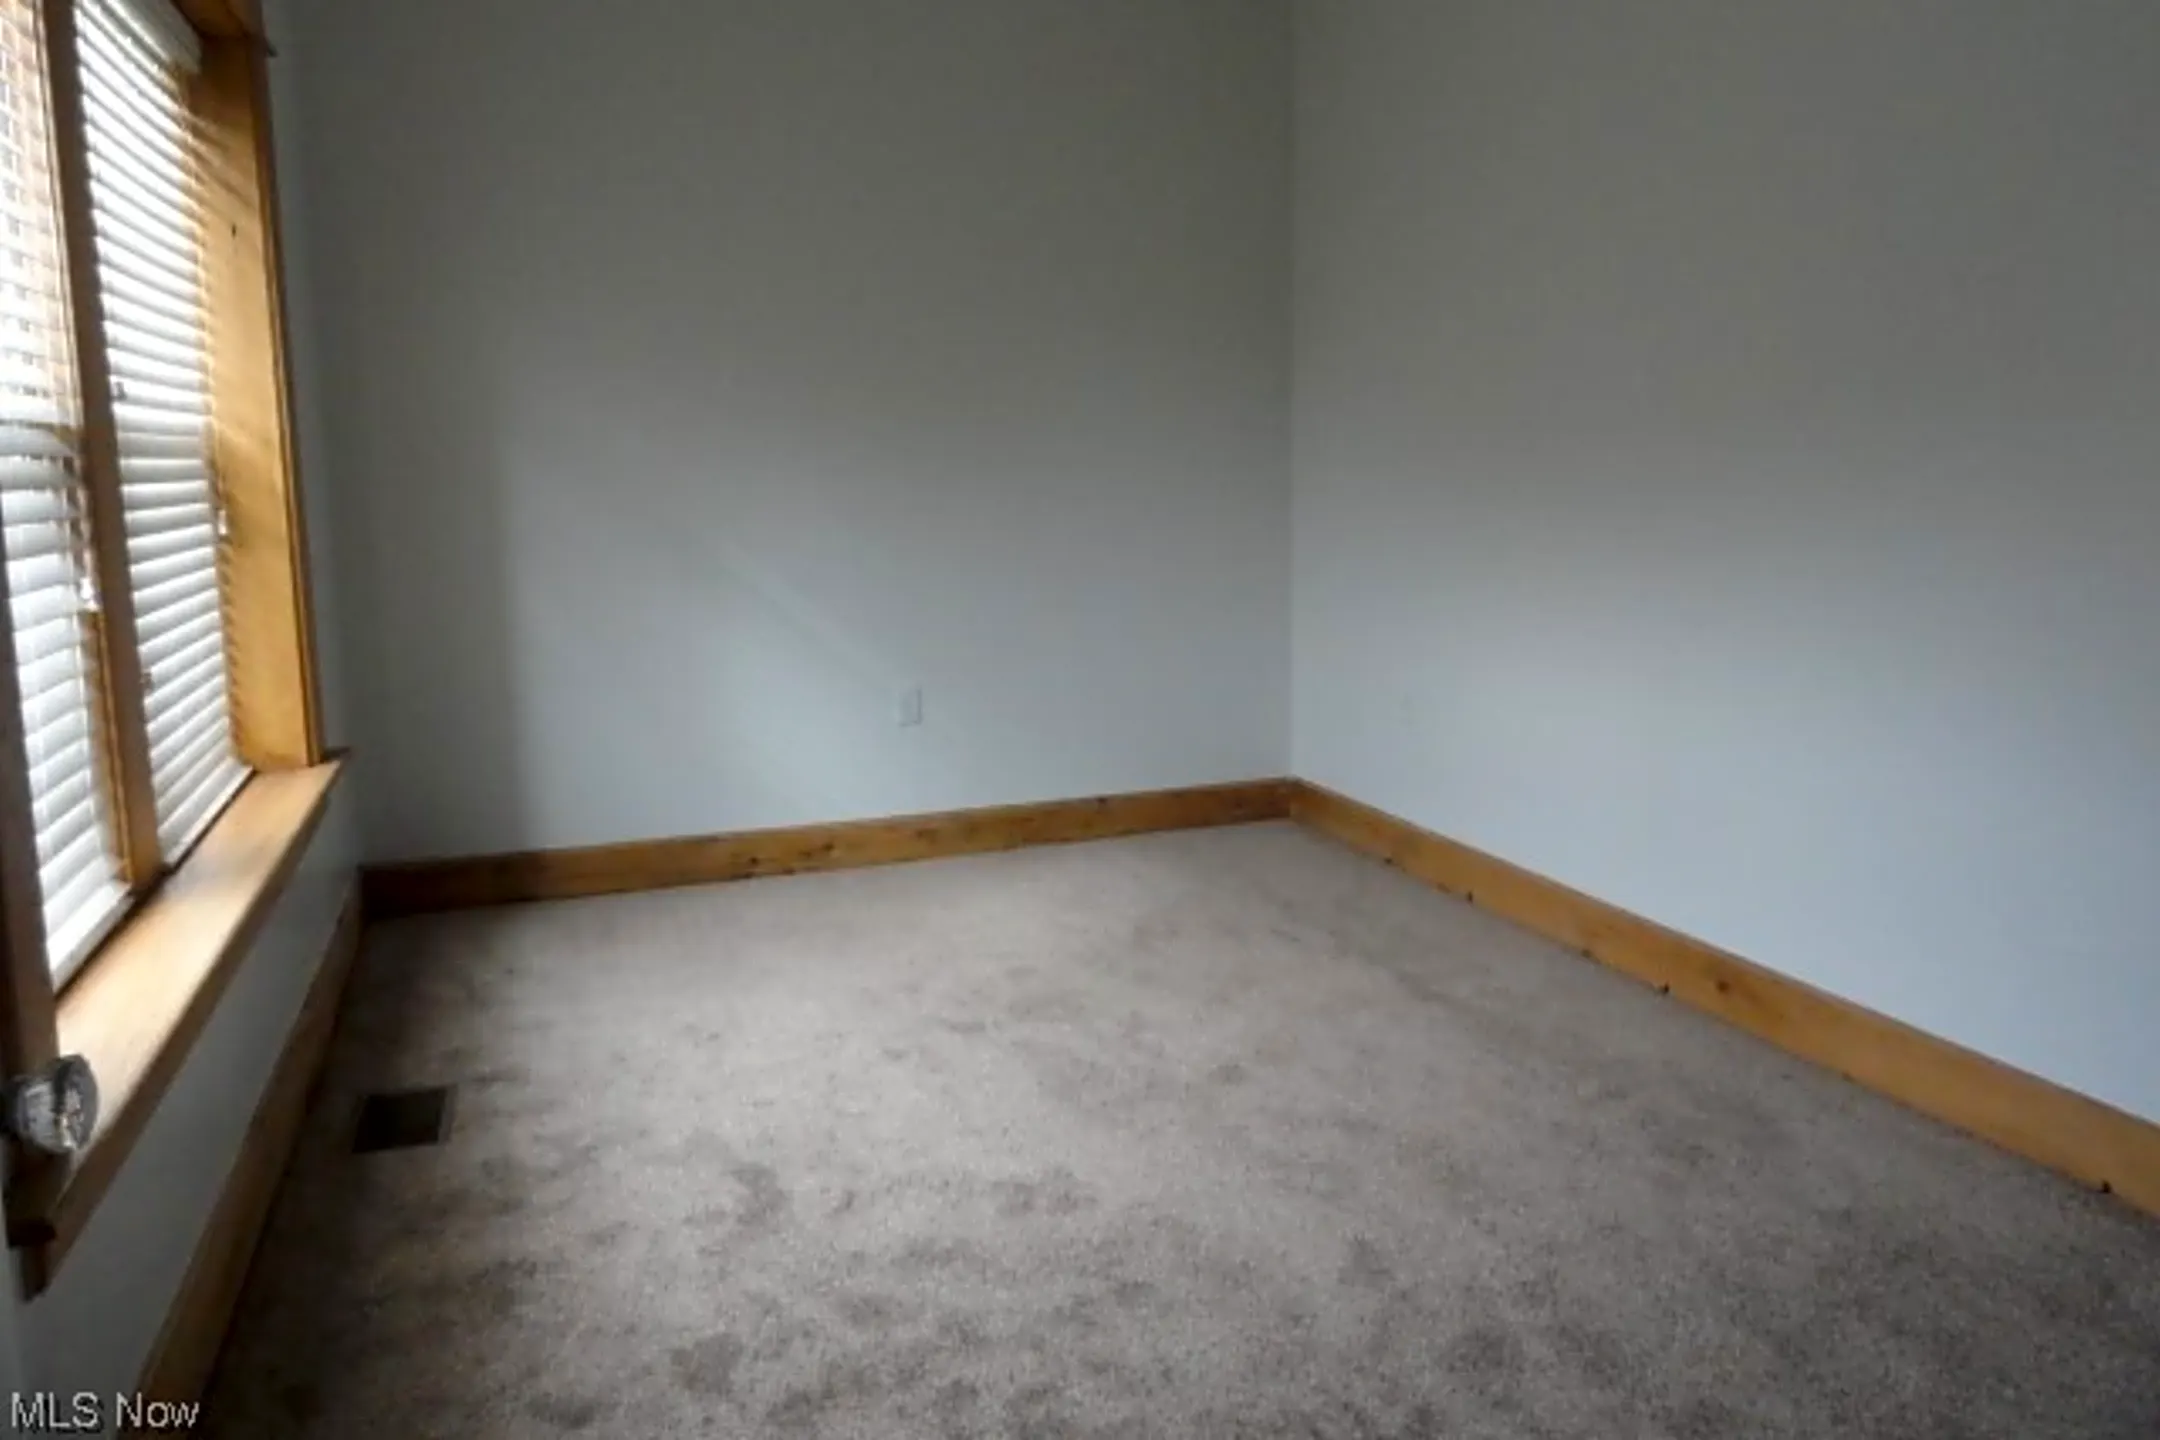 Bedroom - 11433 Ashbury Ave #2 - Cleveland, OH